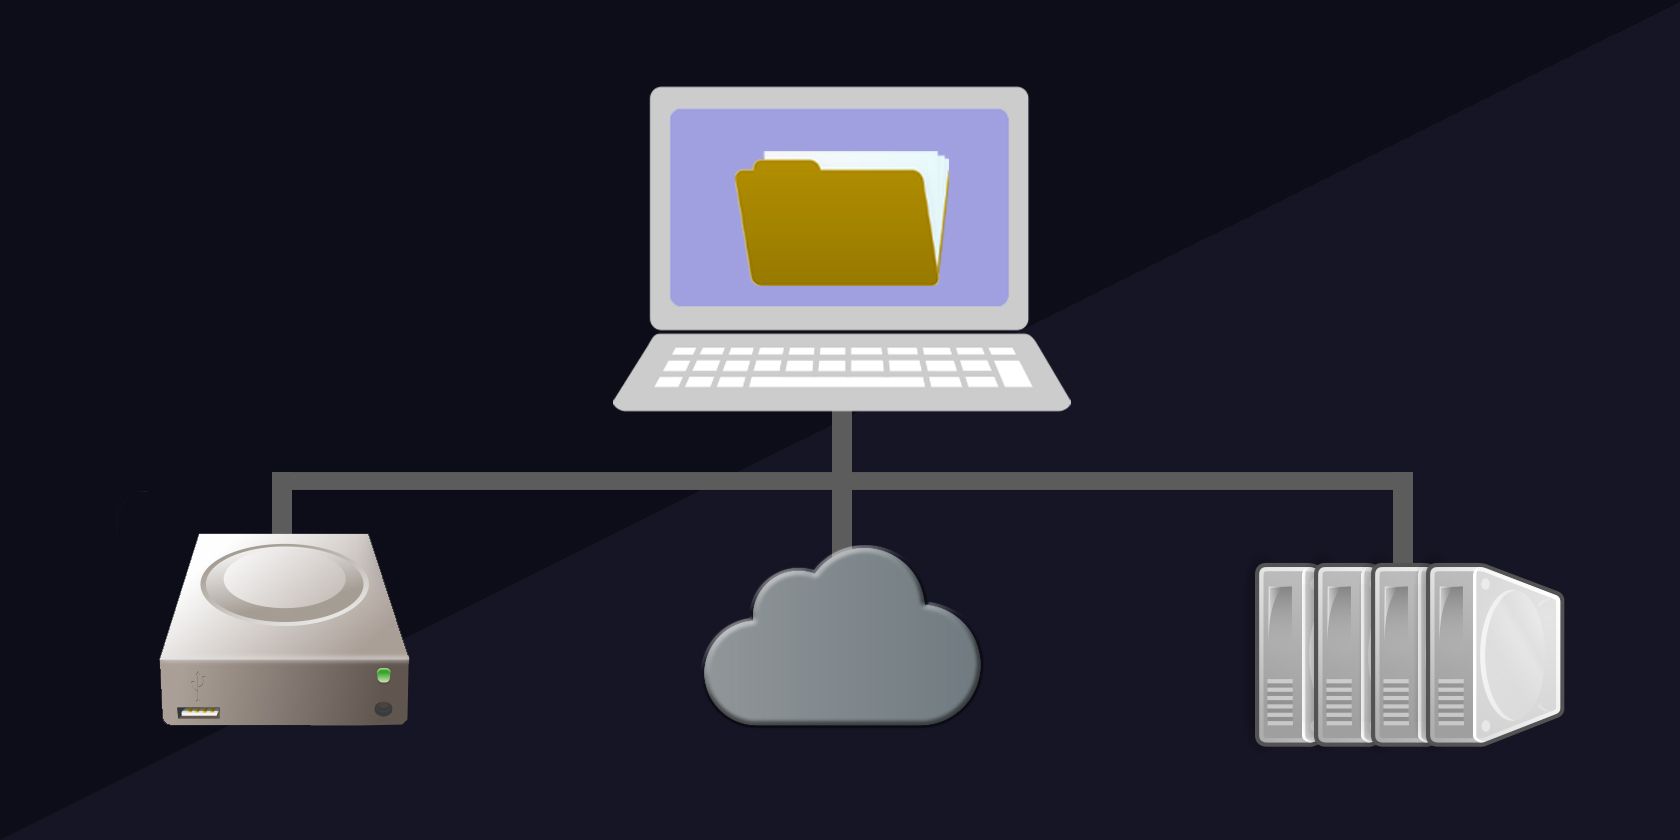 Backup all important files and data to an external storage device or cloud service.
Connect your device to a stable and uninterrupted internet connection.